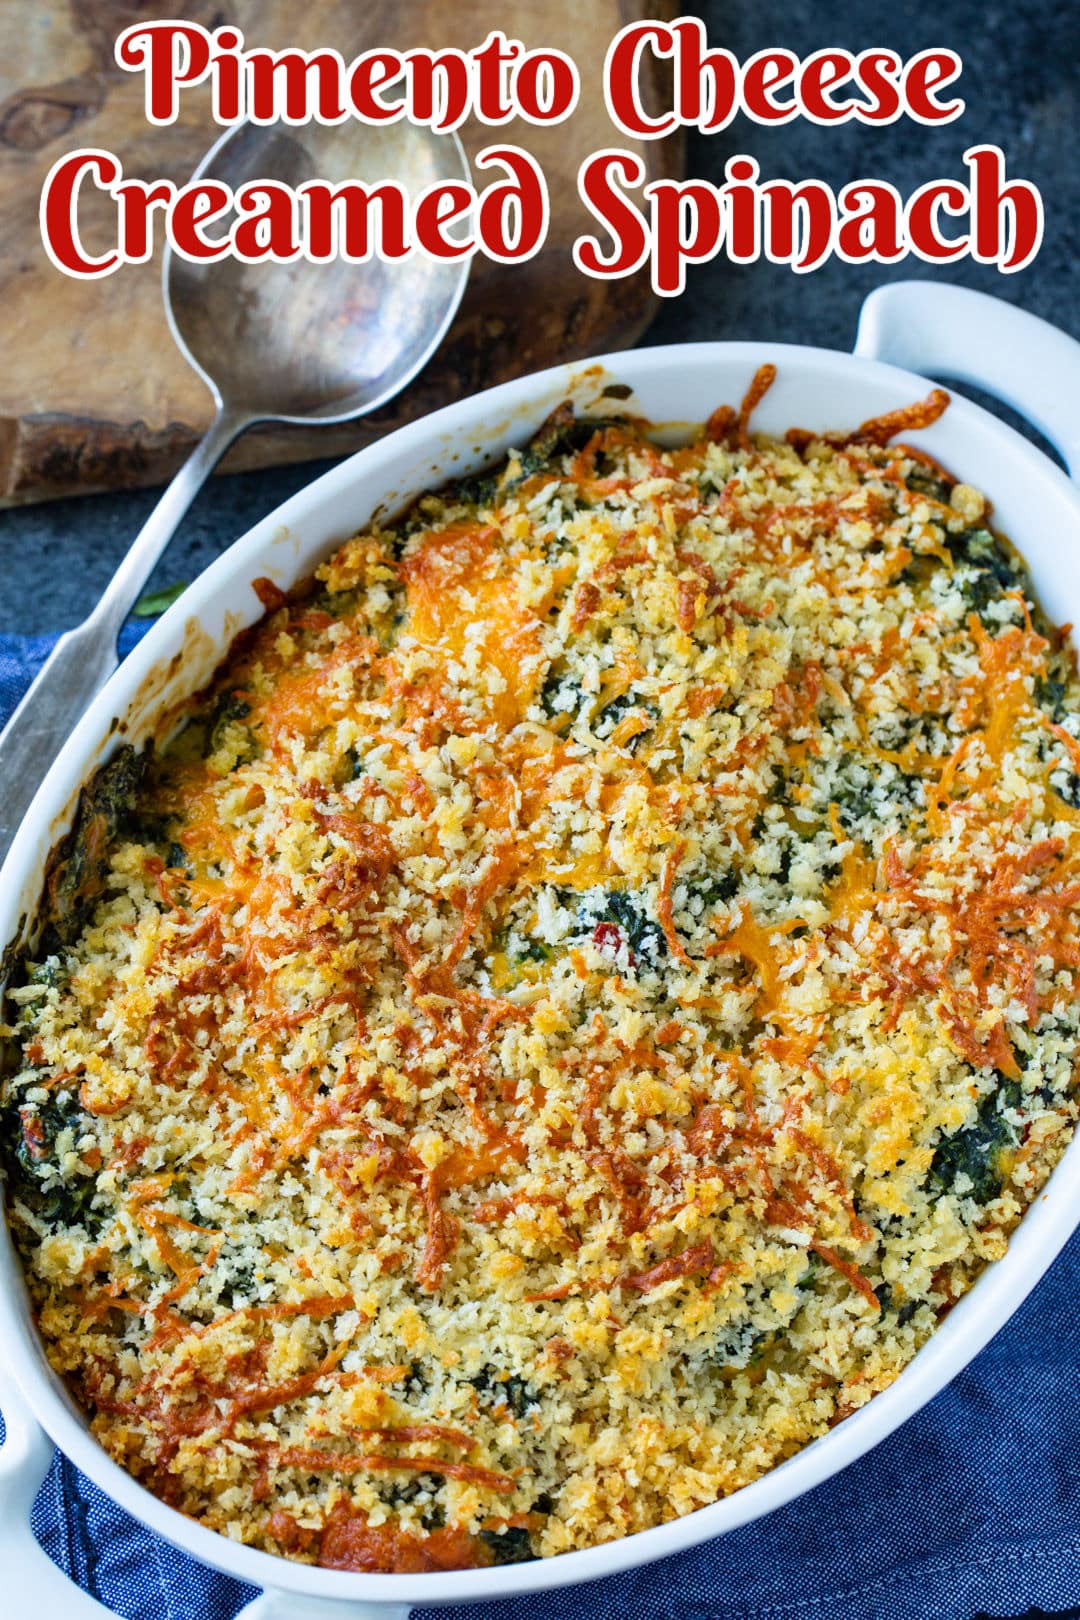 Pimento Cheese Creamed Spinach in a baking dish.